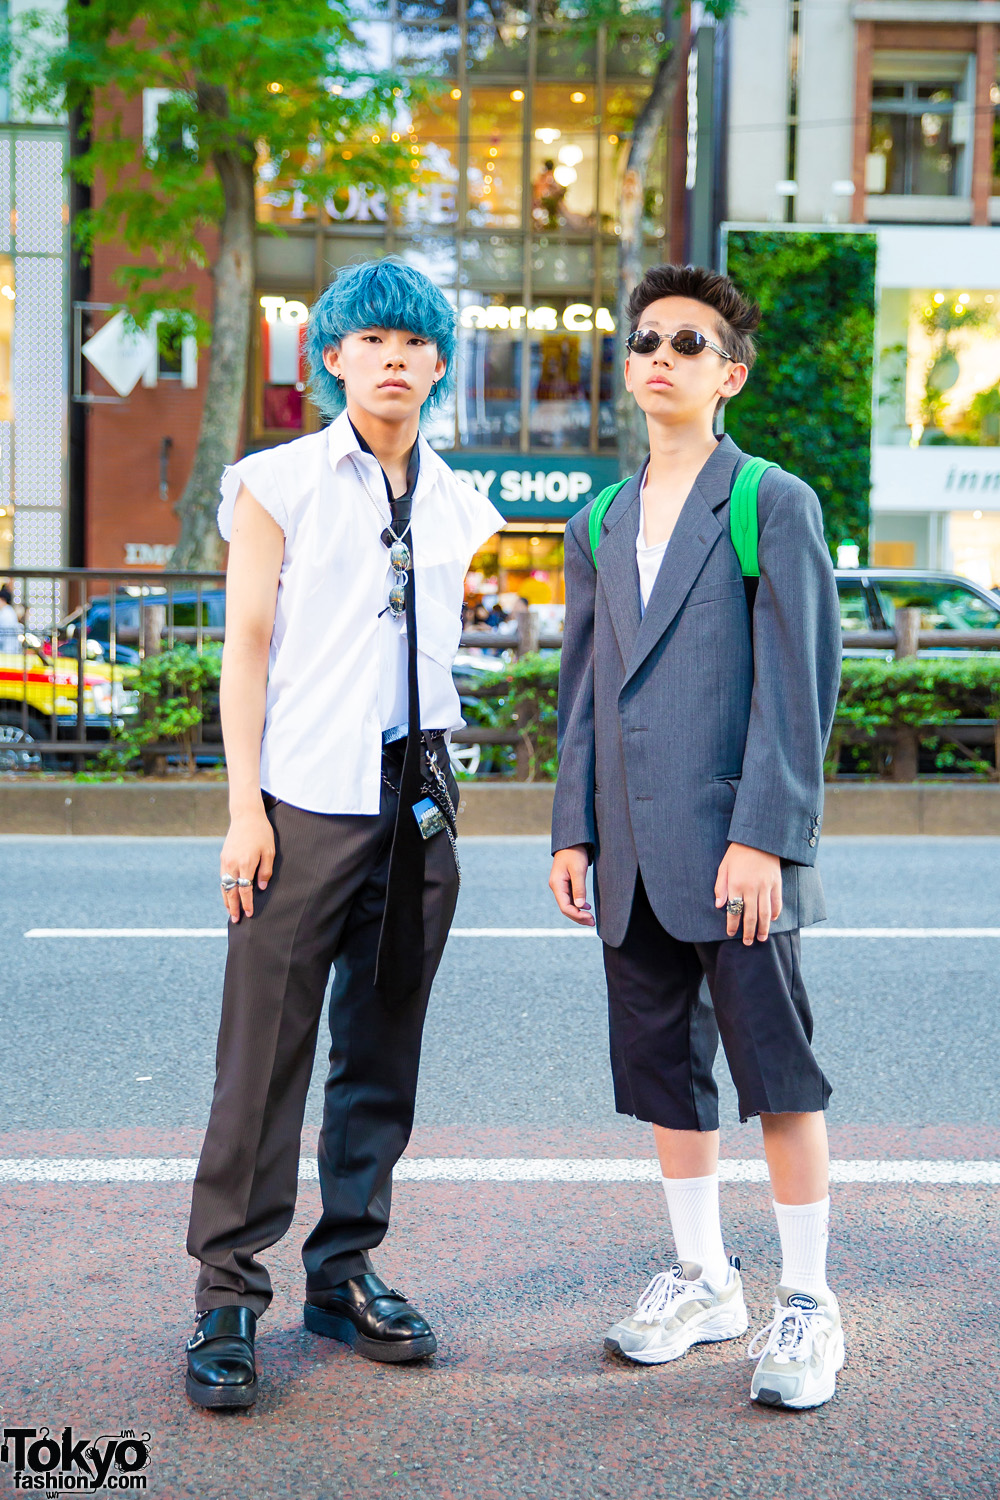 Harajuku Guys in Vintage & Handmade Streetwear w/ Subciety, Valentino, Moon Star, Foot The Coacher, Vaqueria & Comme des Garcons